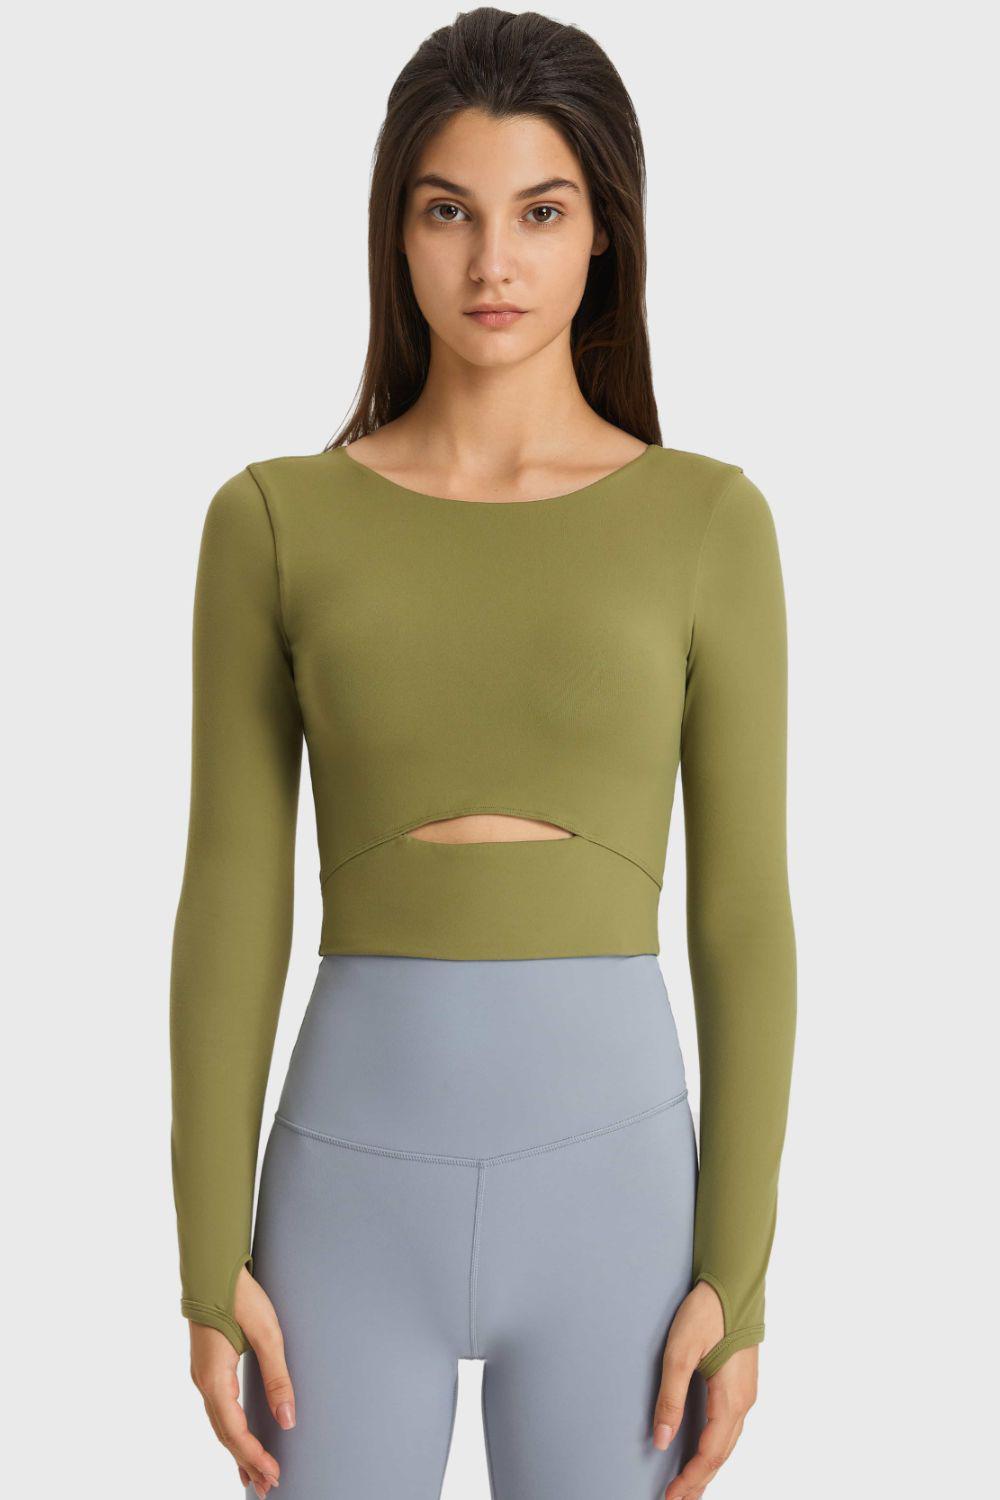 Cutout Long Sleeve Cropped Sports Top-TOPS / DRESSES-[Adult]-[Female]-Green-4-Blue Zone Planet